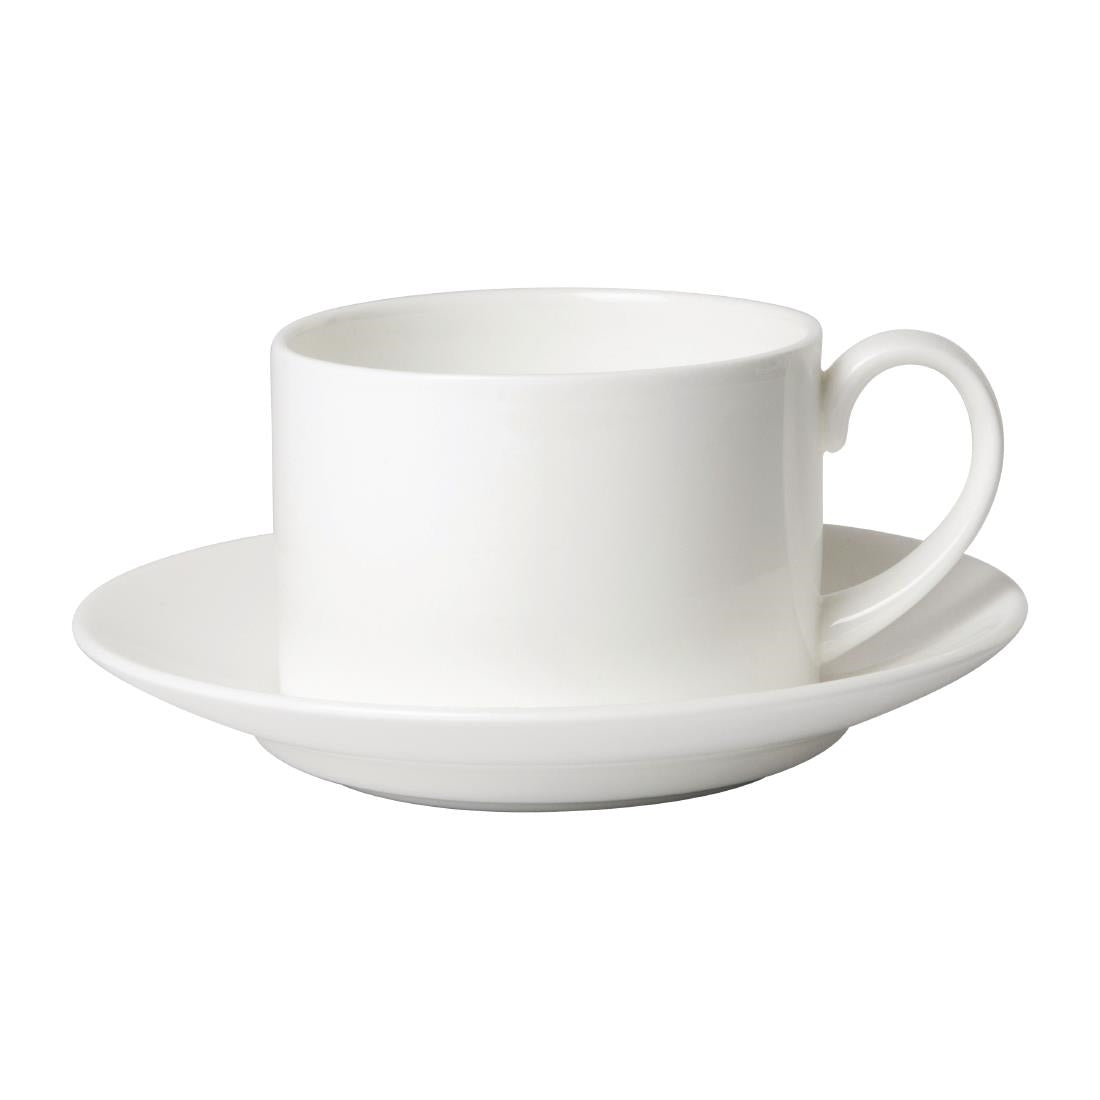 FE025 Royal Crown Derby Whitehall Beverage Cup (Pack of 6) JD Catering Equipment Solutions Ltd